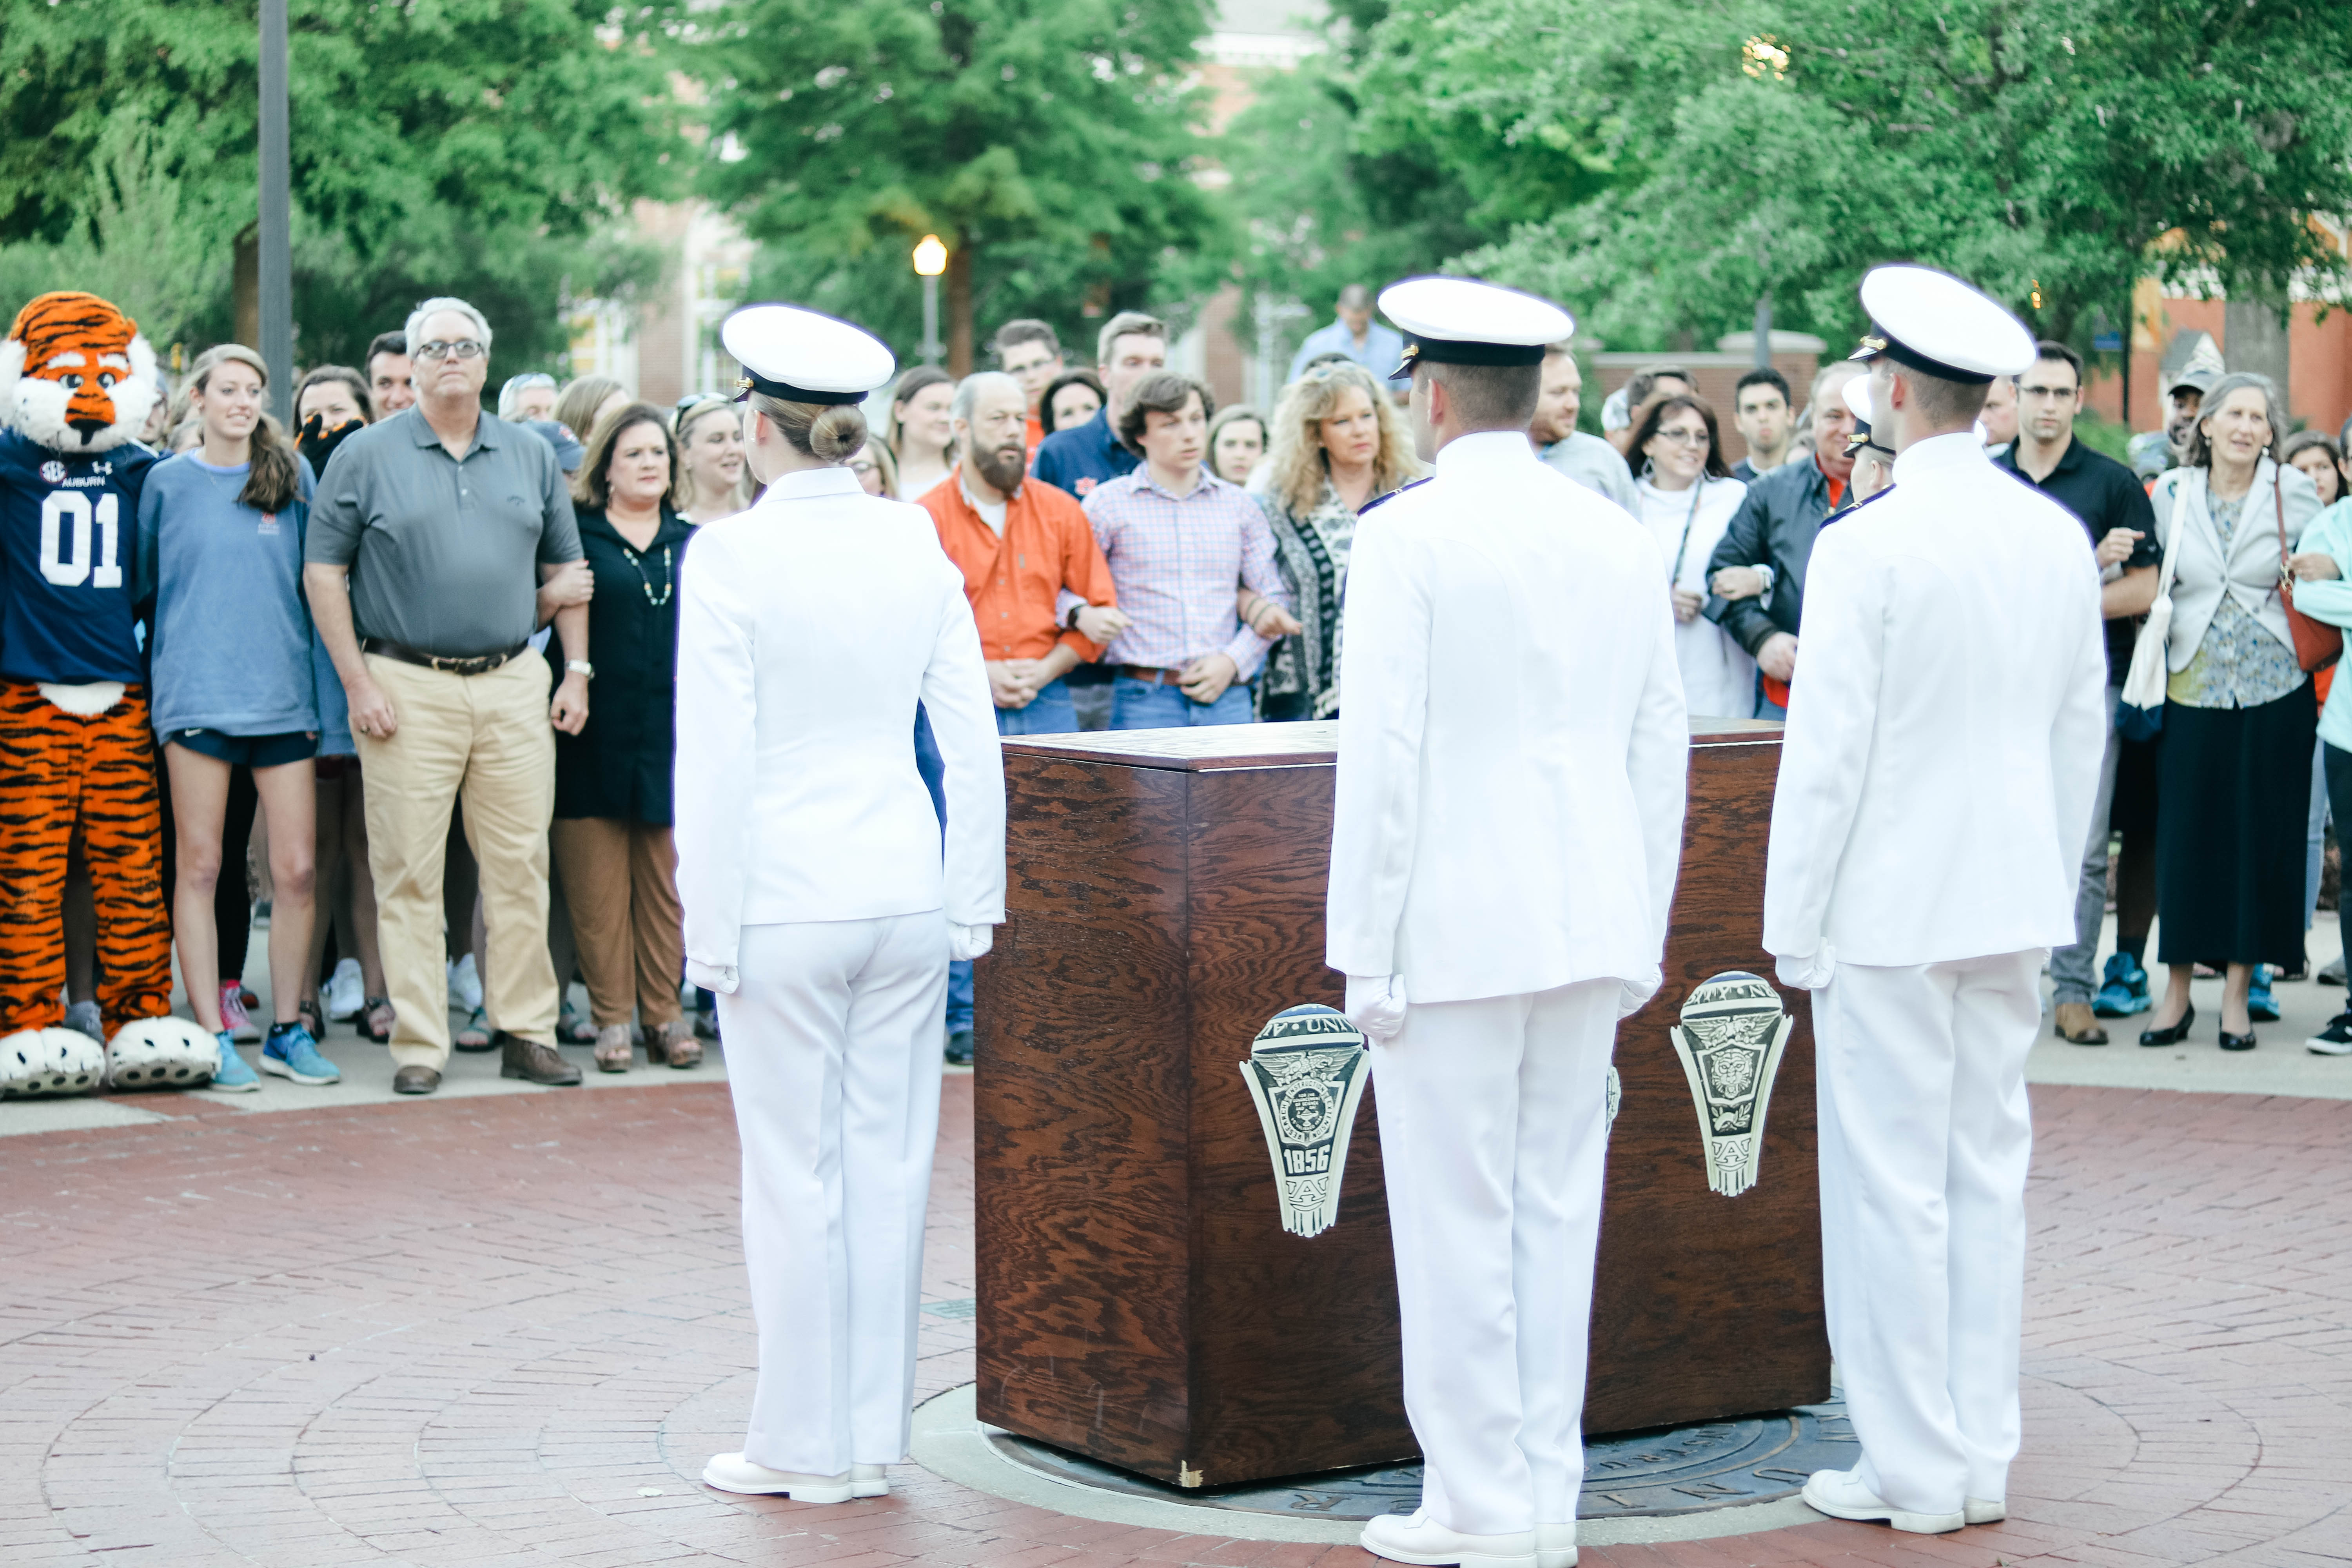 Members of ROTC place the ring box in position over the Auburn Seal at the Ring Night event.